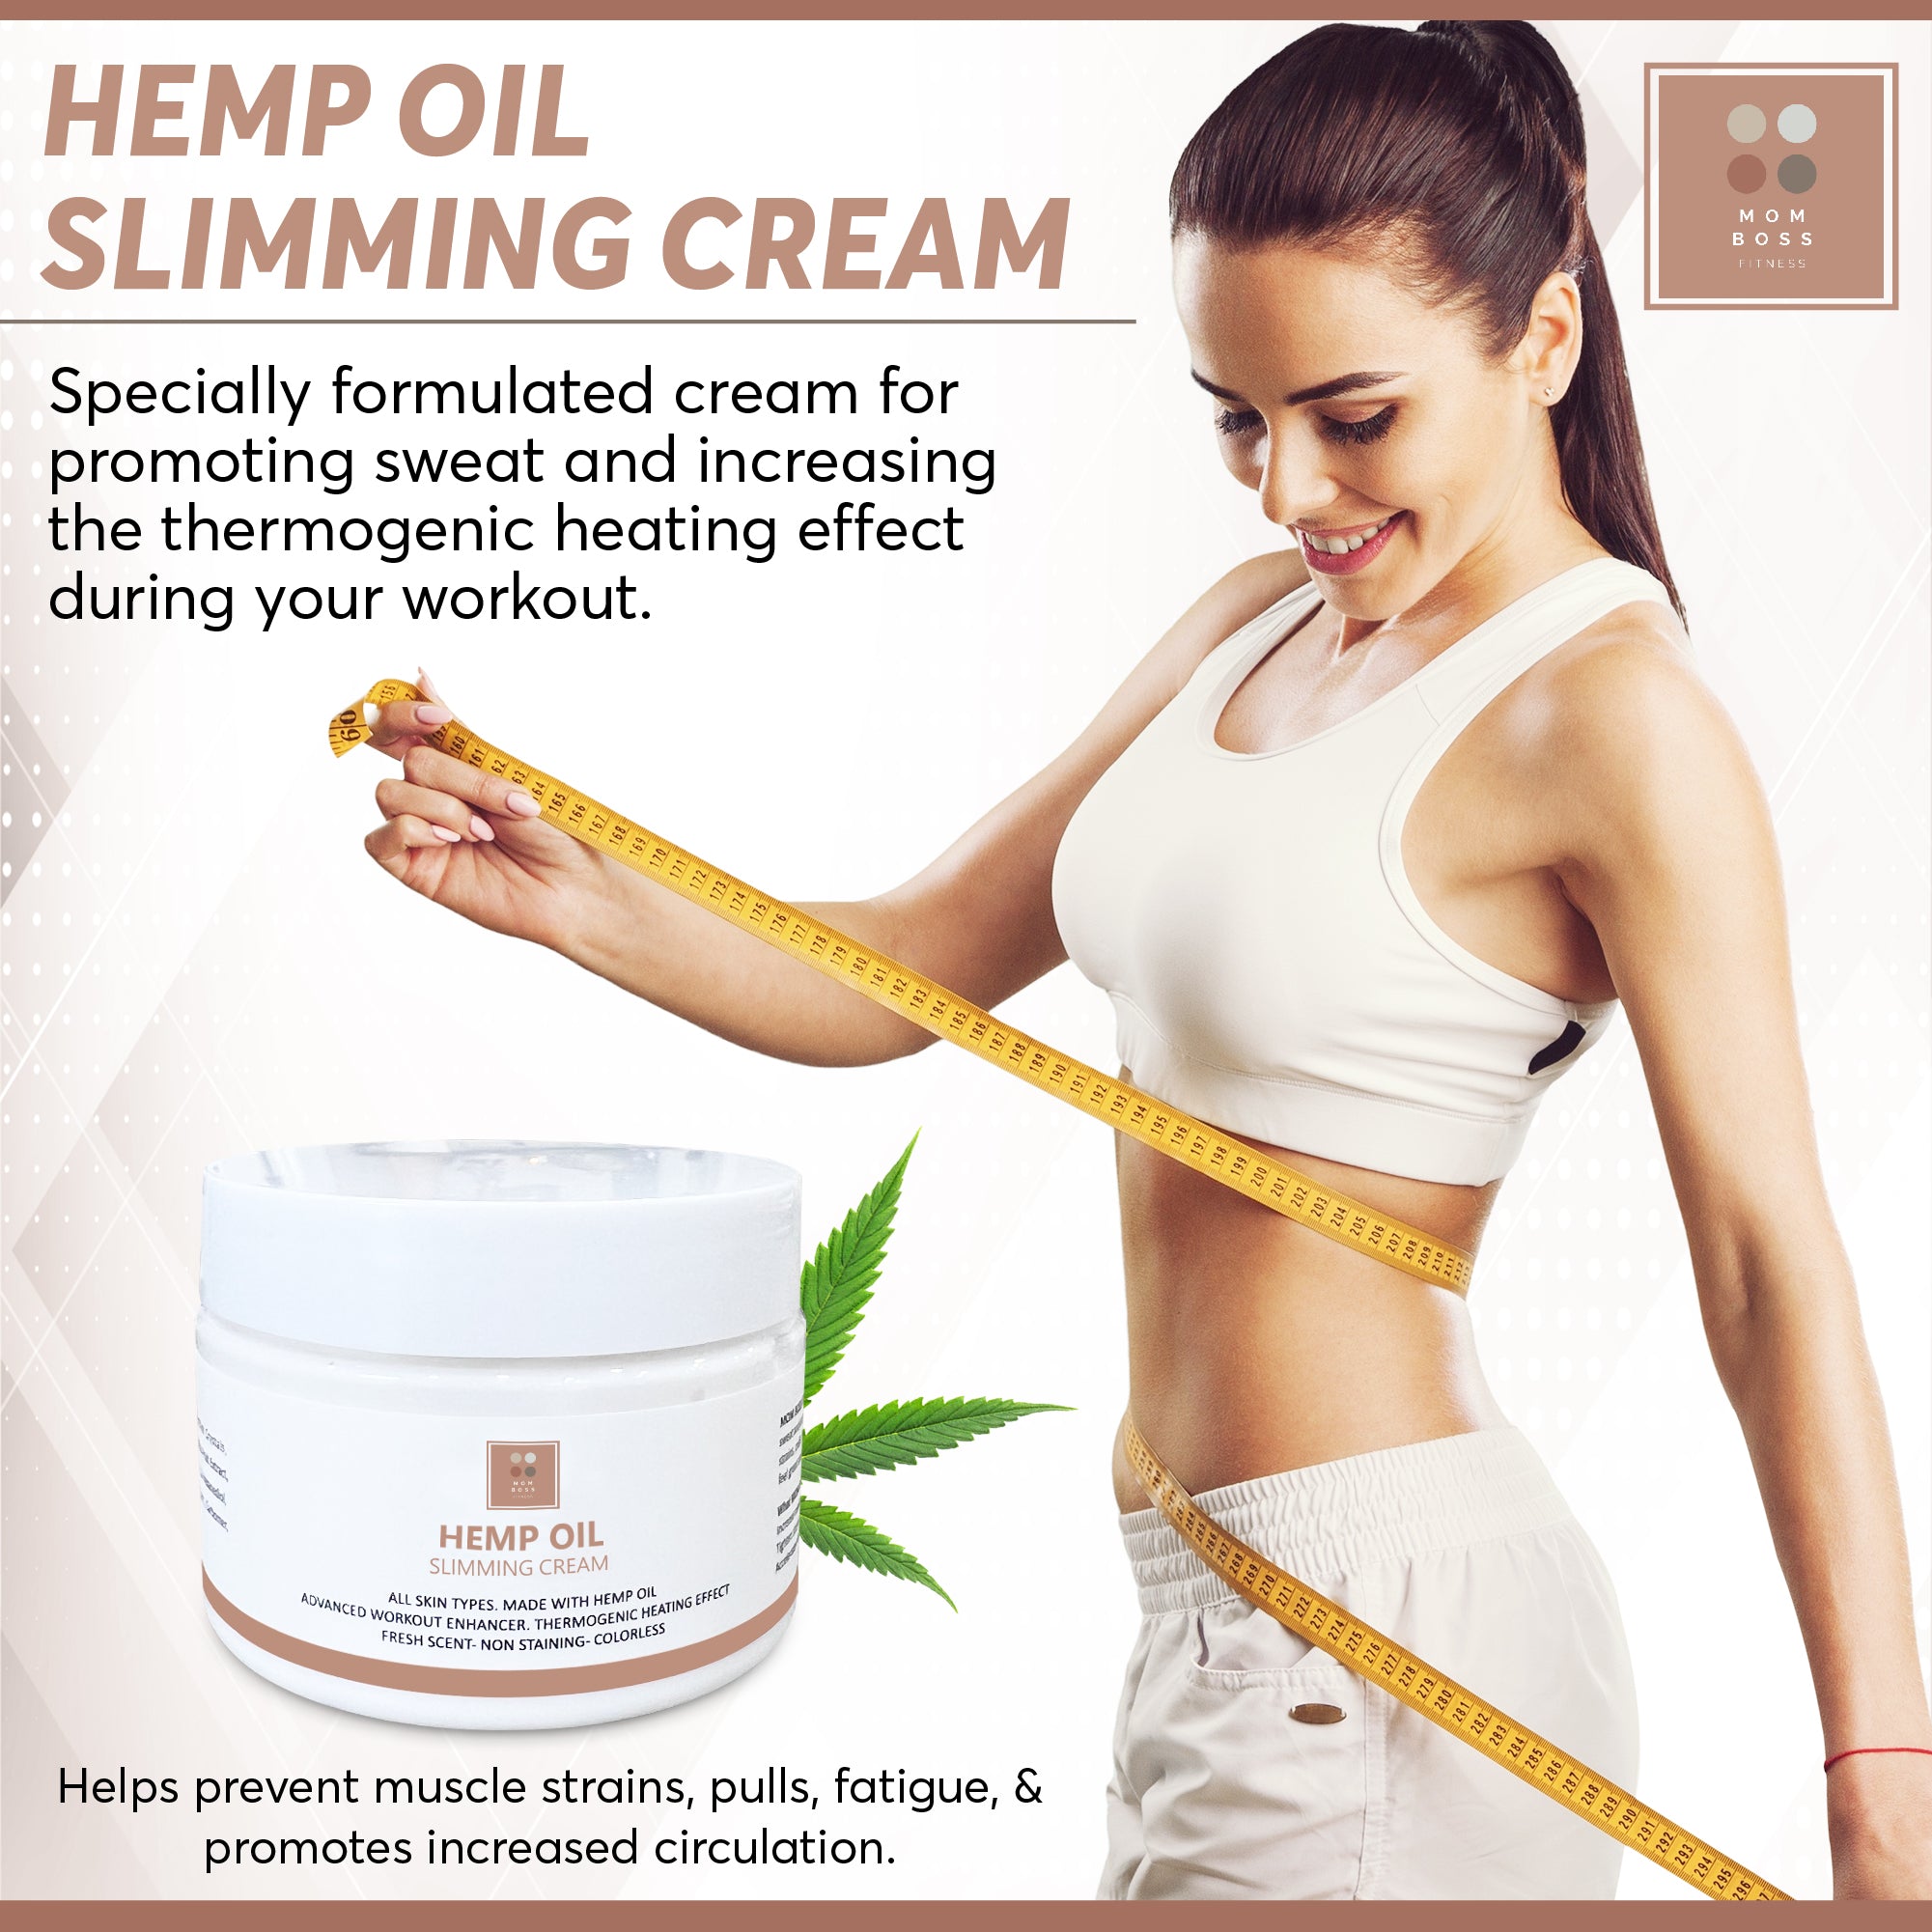 Hemp Oil Slimming Cream - Non Staining Weight Loss Cellulite Cream - Workout Enhancer Skin Tightening Cream with Thermogenic Heating Effect - Fat Burning Cream for Belly, Waist, Stomach & Buttocks